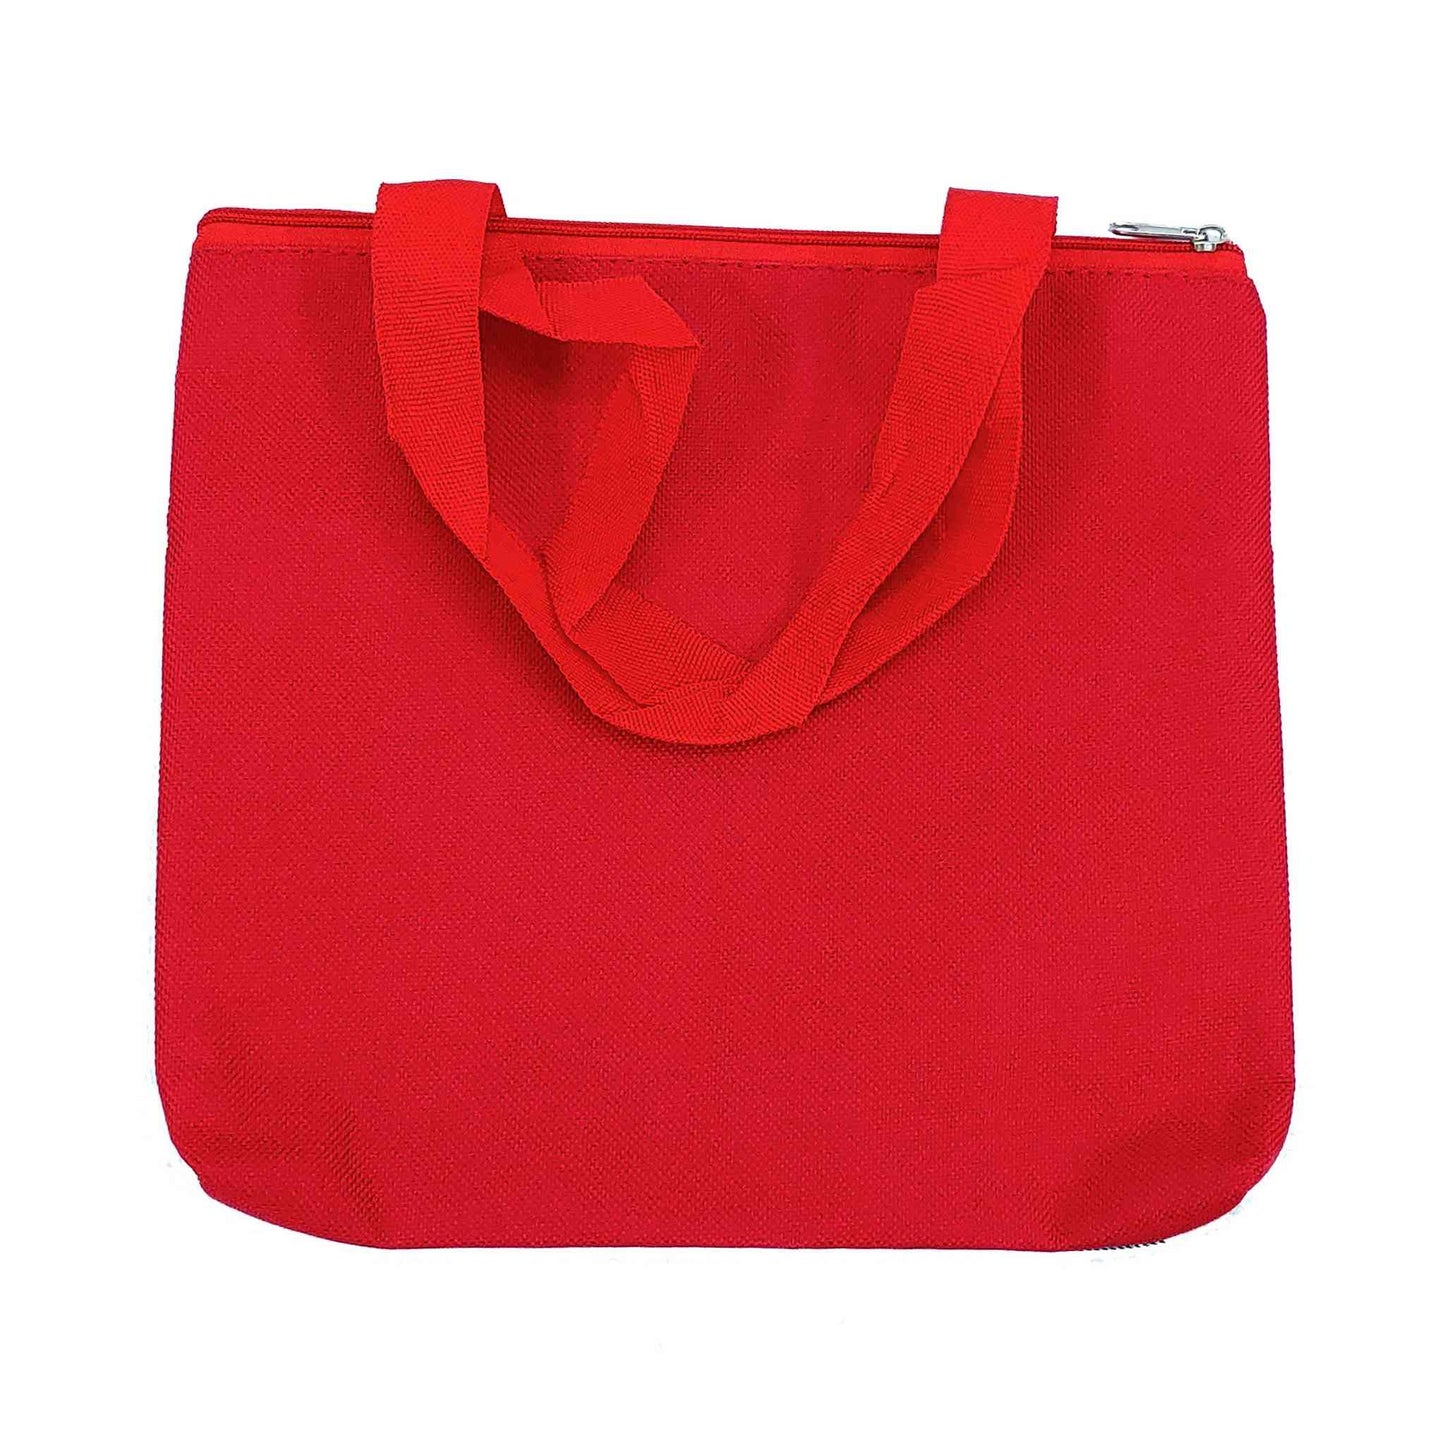 Imported Durable Canvas Printed multi purpose utility Medium size Bag with handles for all occasions for the girls and ladies, Design 2, Red - Indian Petals